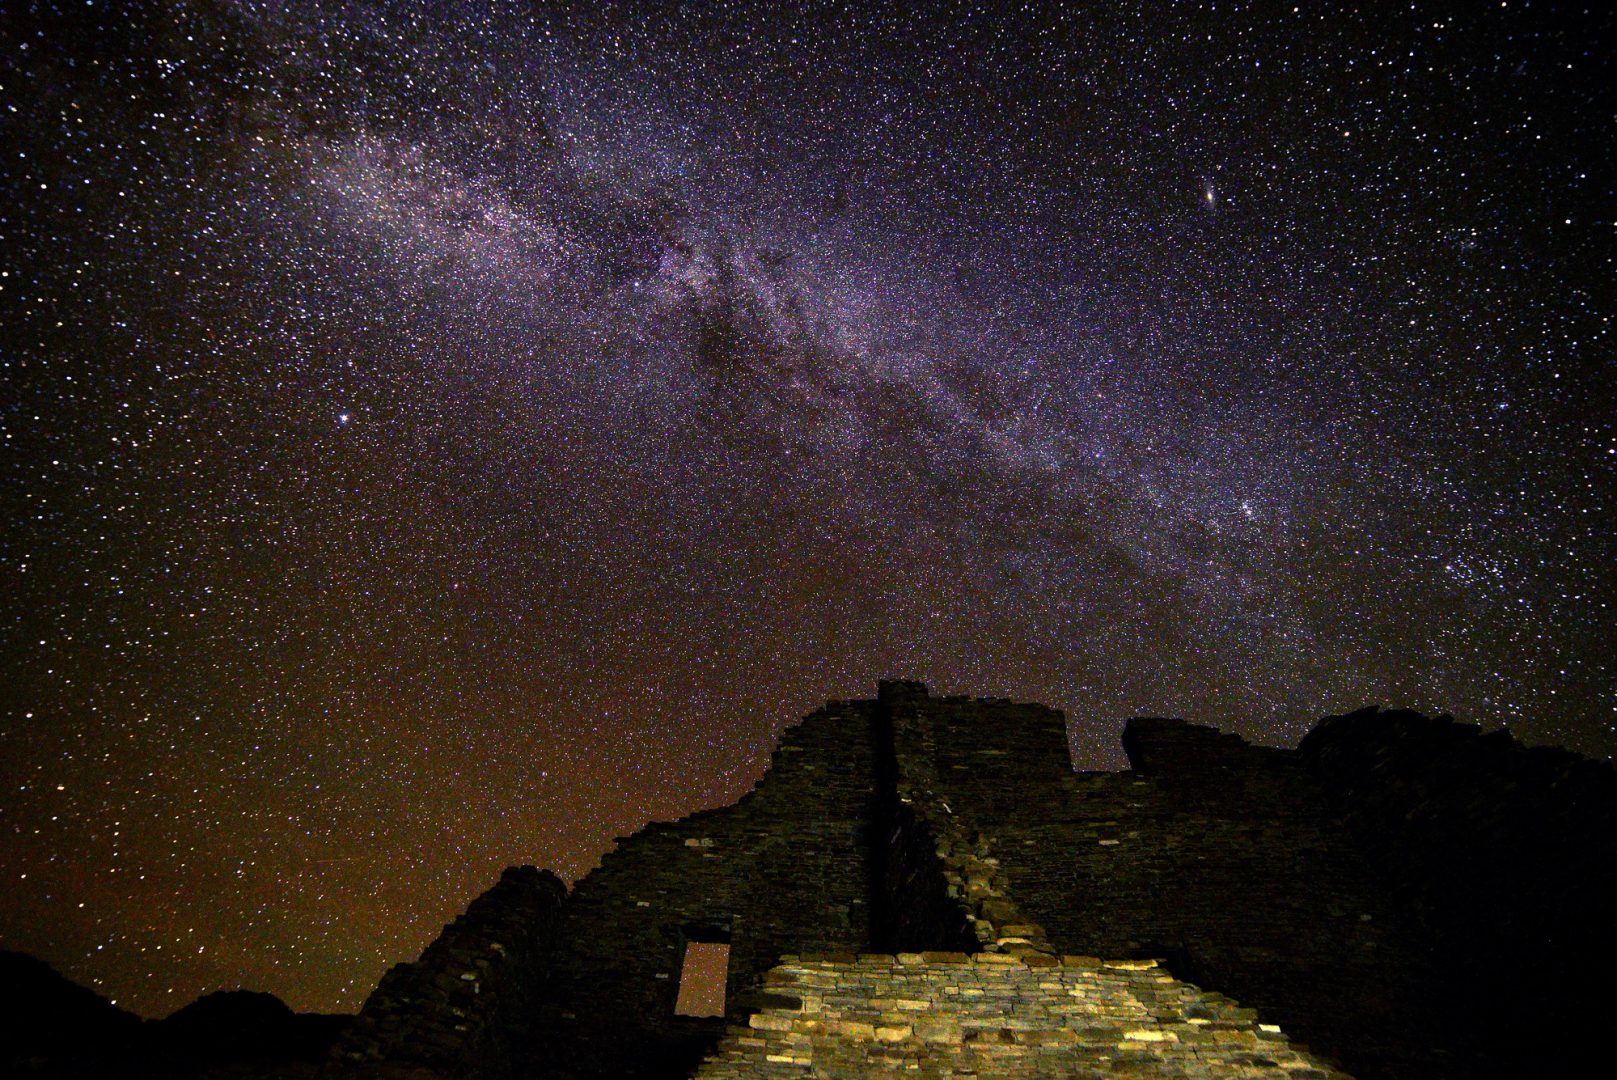 The Milky Way and stars fill the night sky above an Ancestral Puebloan ruin at Chaco Culture National Historical Park, New Mexico.